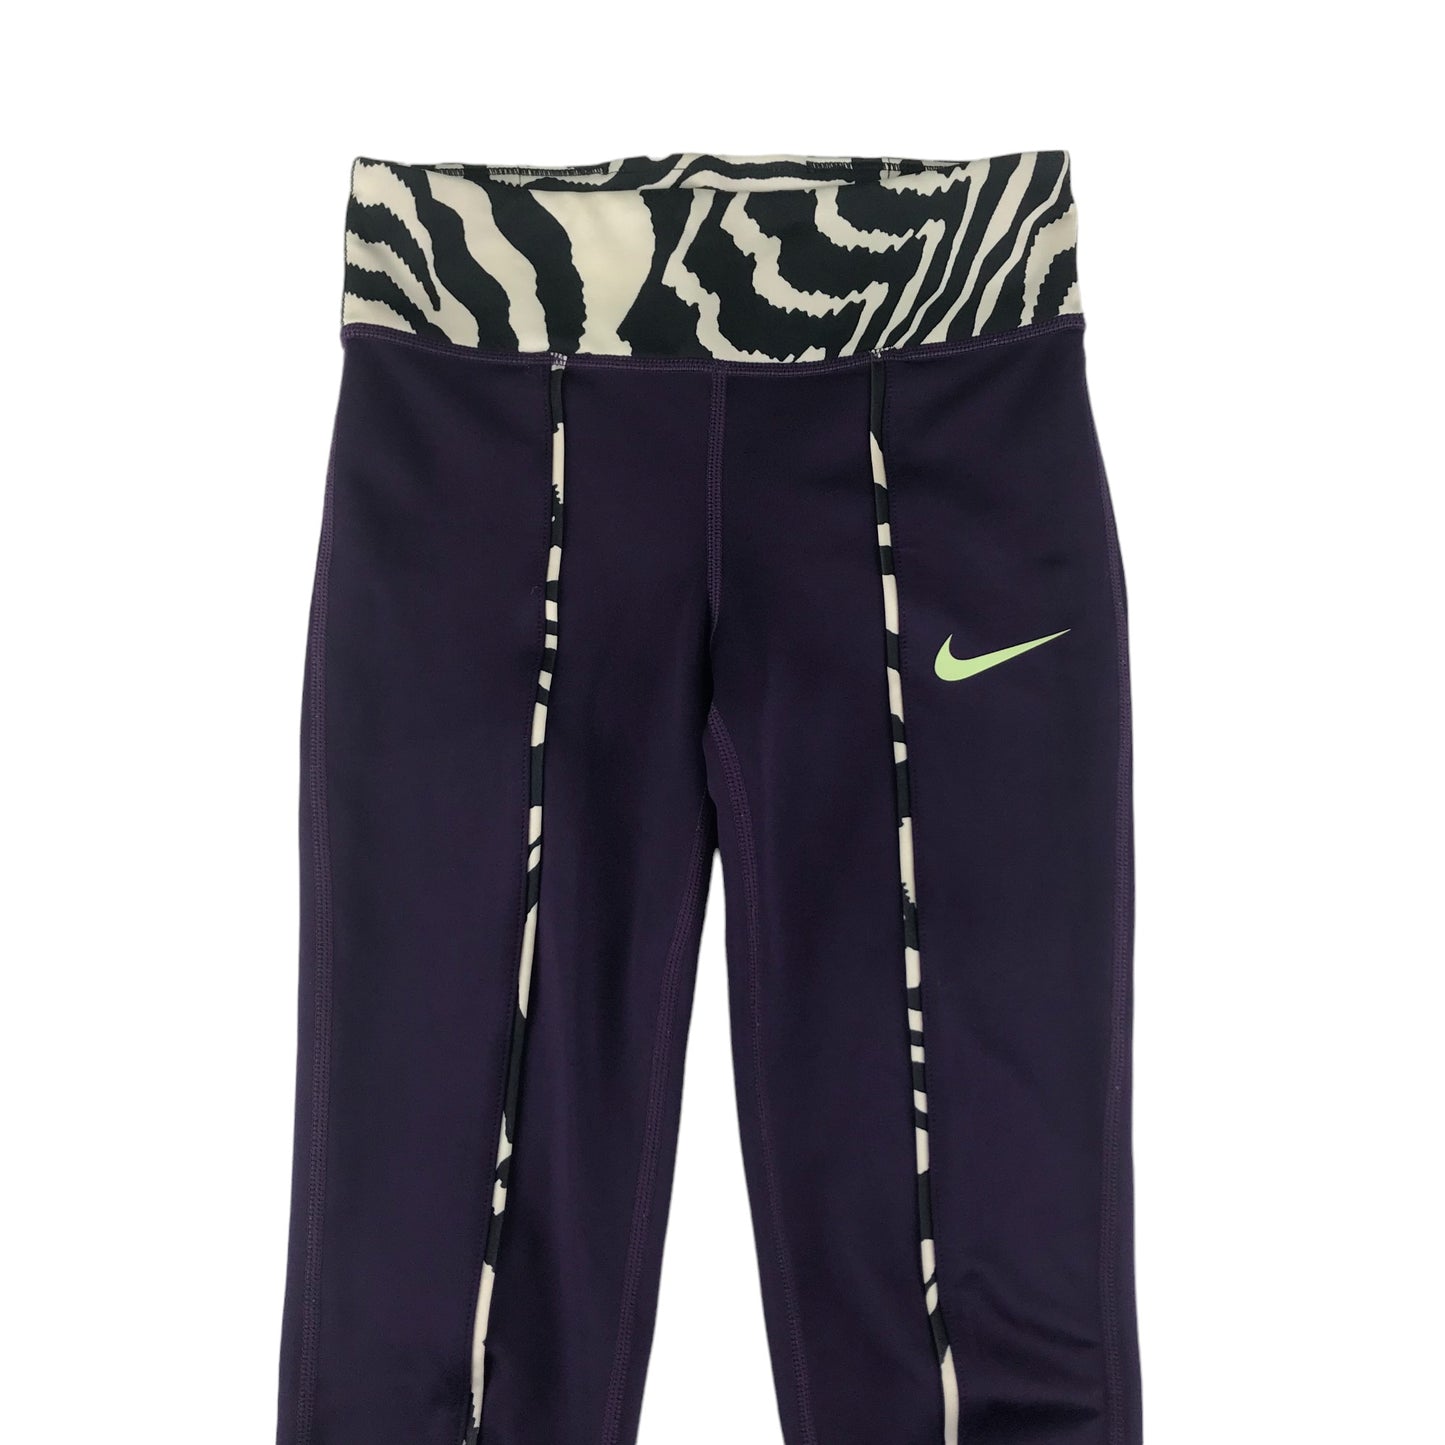 Nike Sport Leggings Age 8-9 Purple With Black and White Graphic Prints